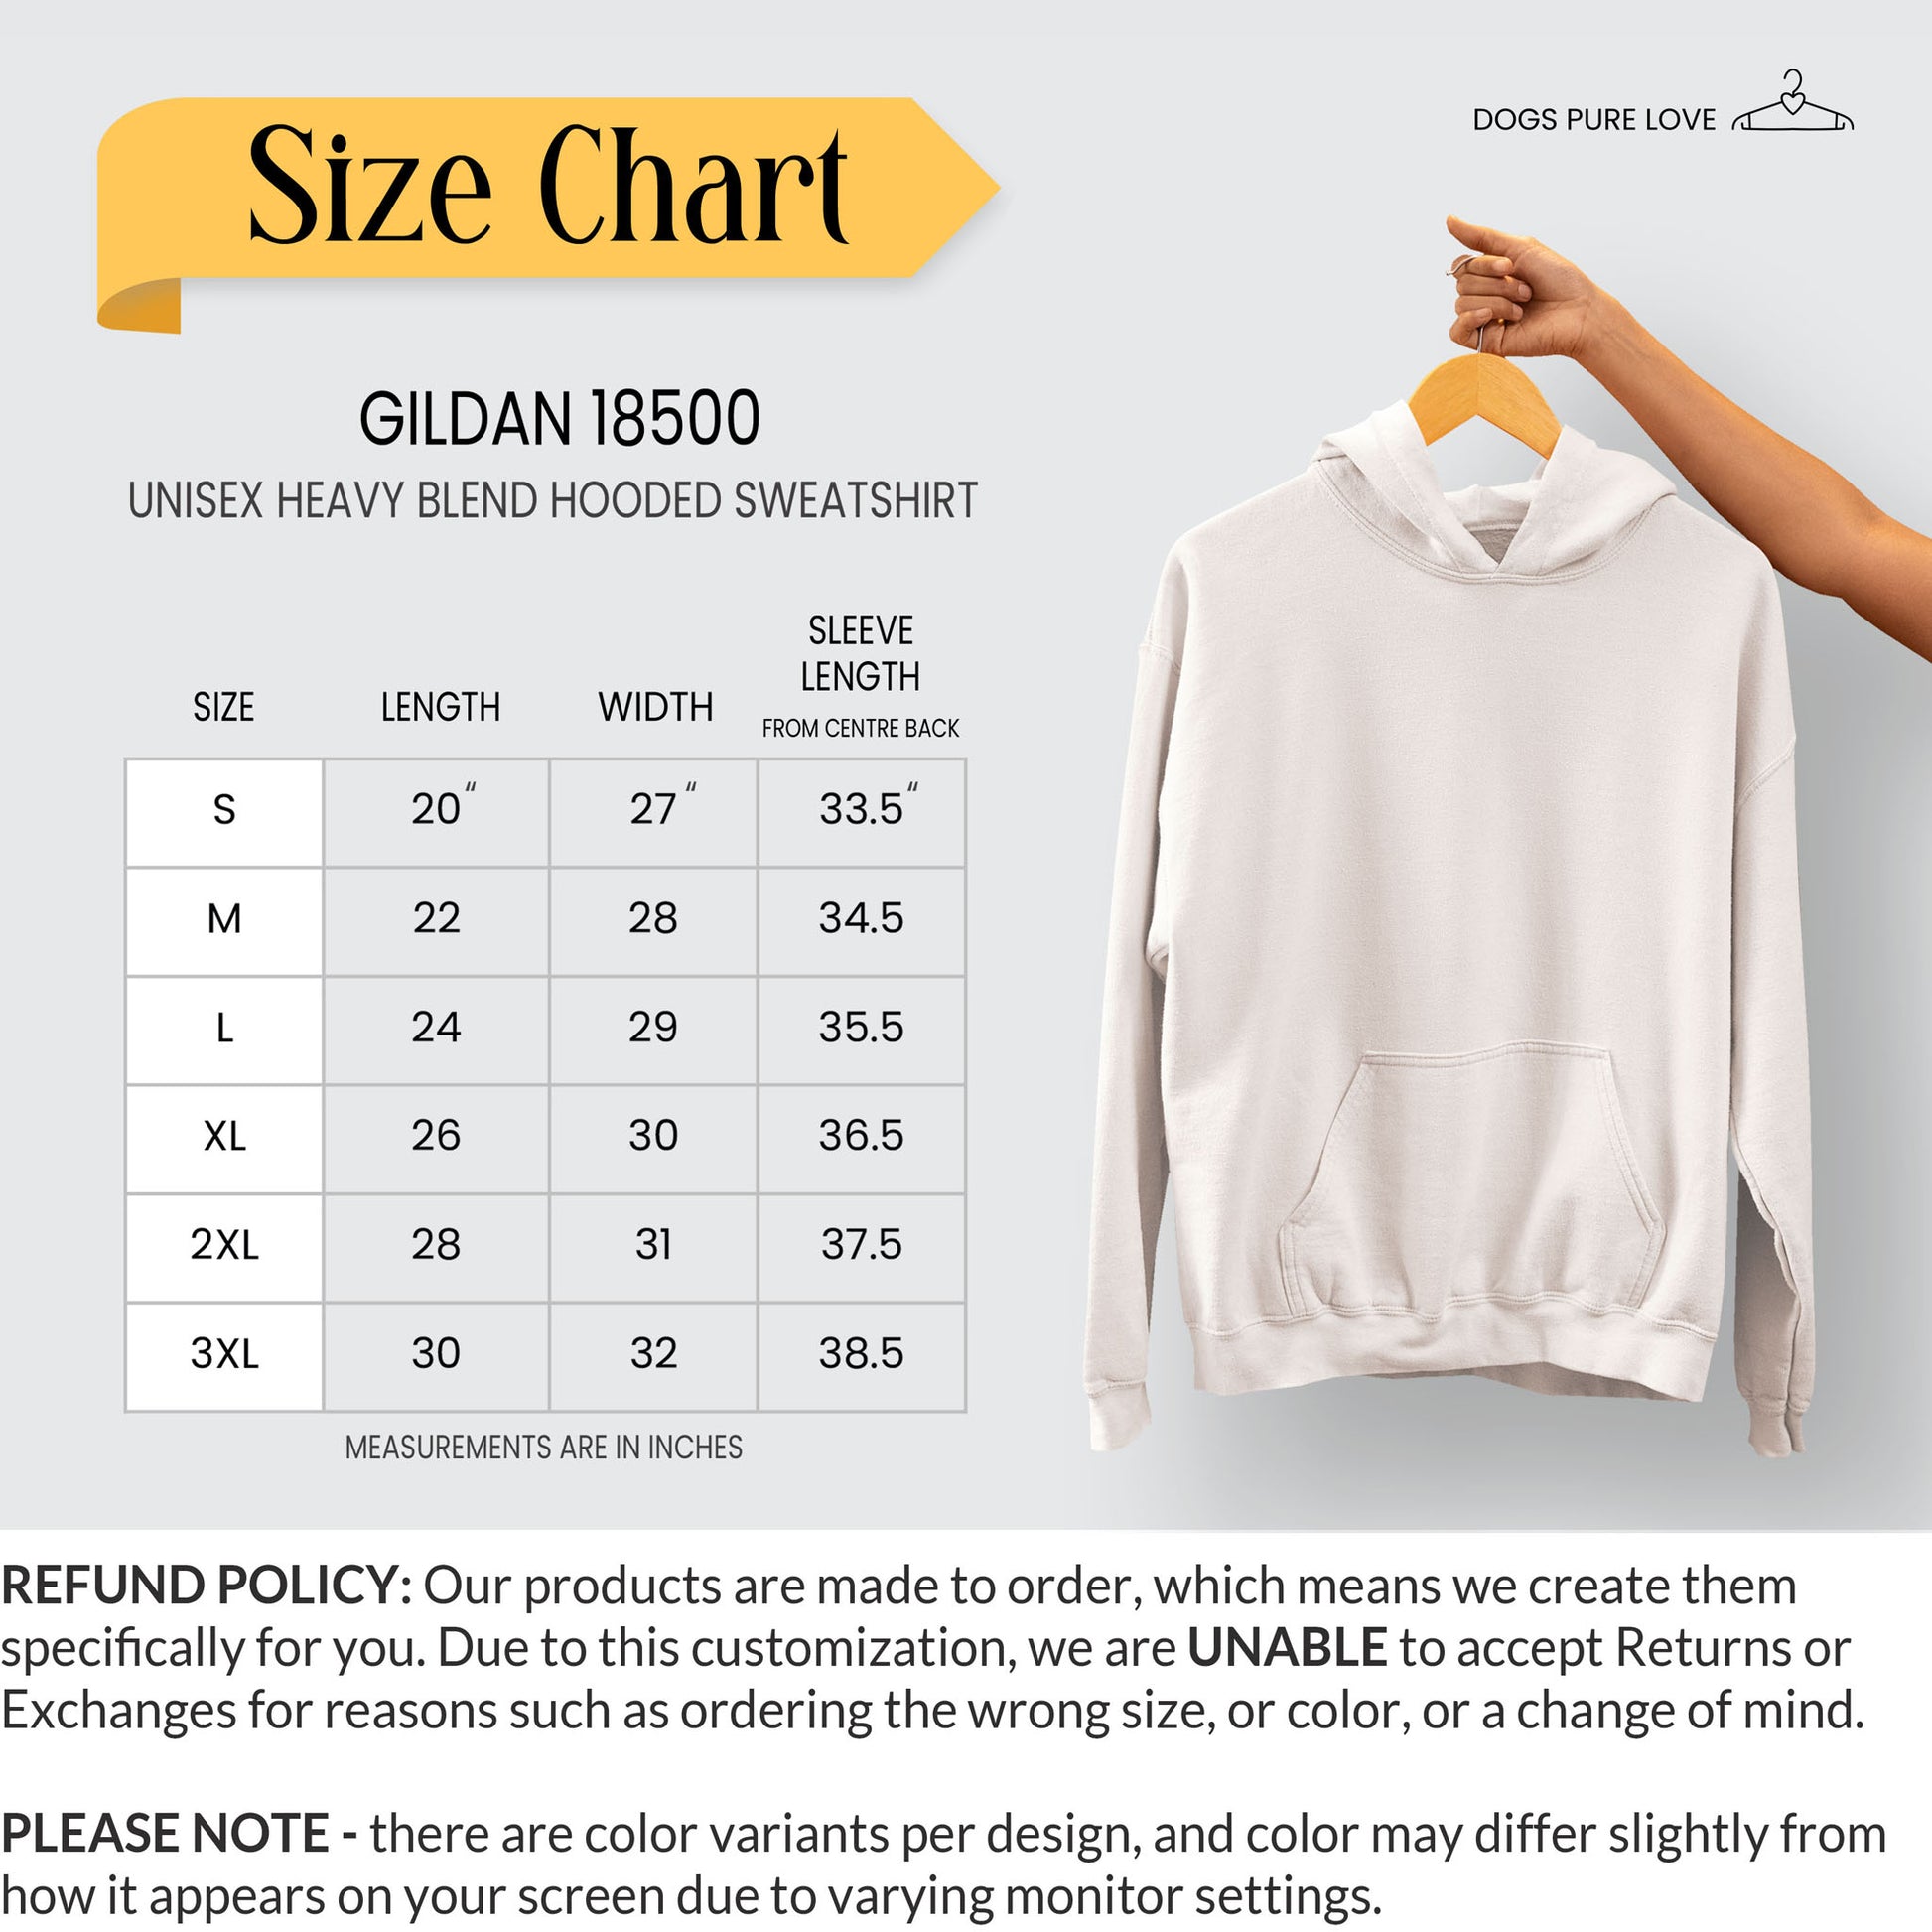 A detailed hoodie size chart by Dogs Pure Love, with a small description of the refund policy.